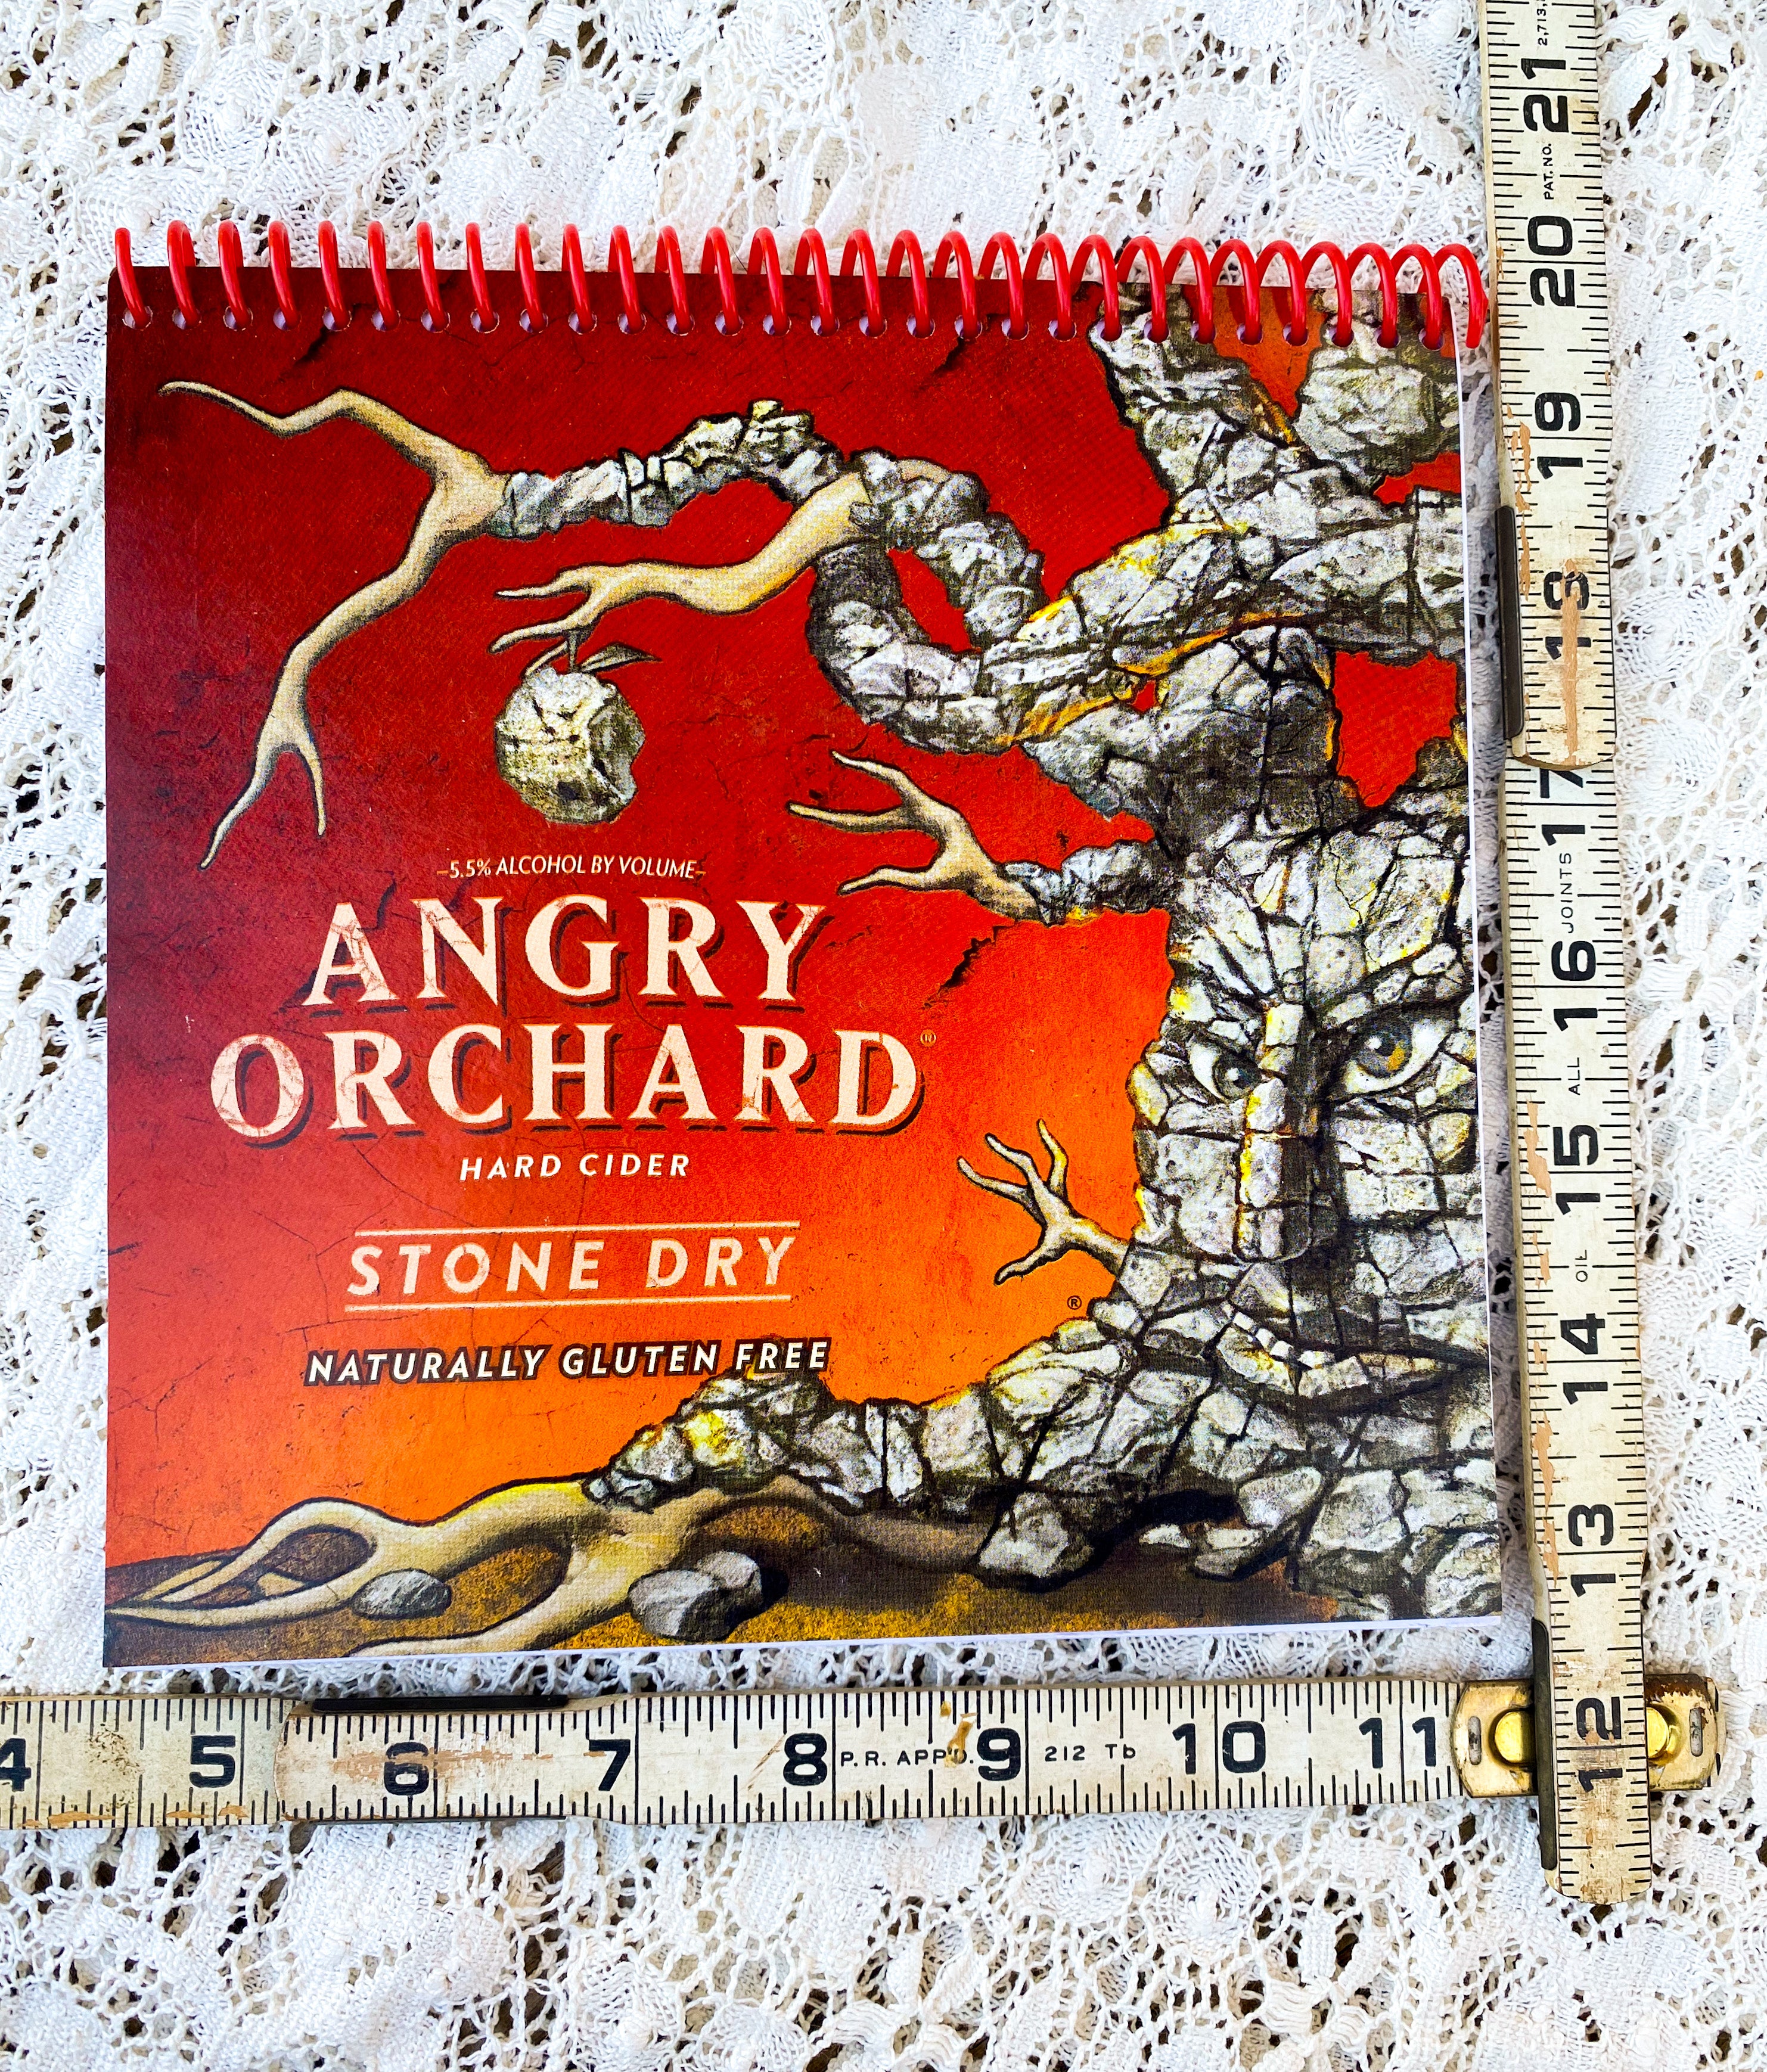 Angry Orchard Stone Dry Recycled Beer Carton Notebook